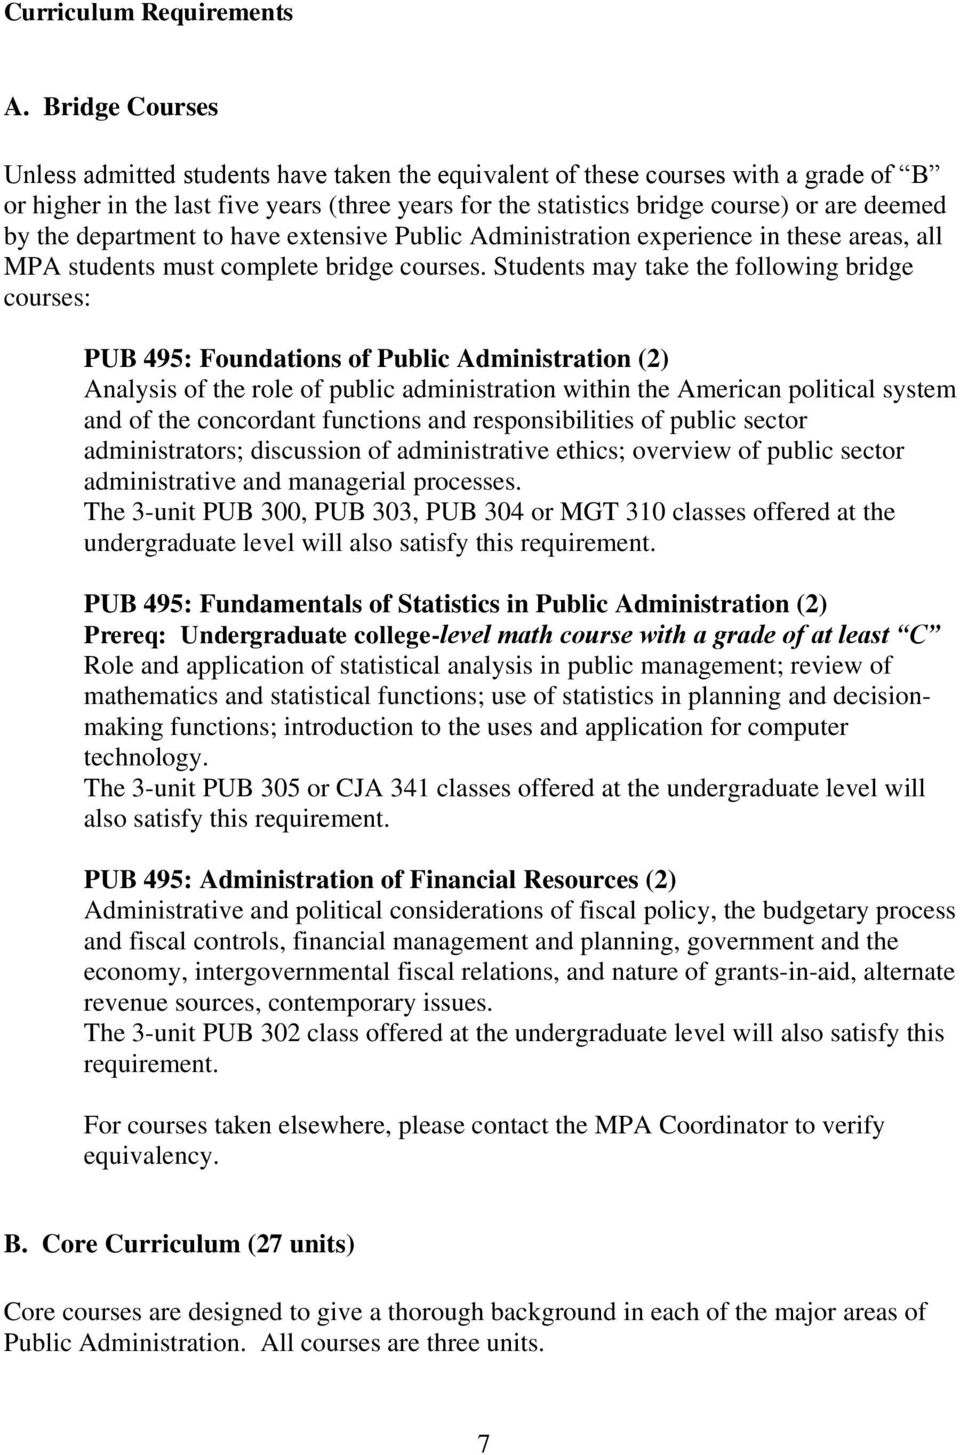 the department to have extensive Public Administration experience in these areas, all MPA students must complete bridge courses.